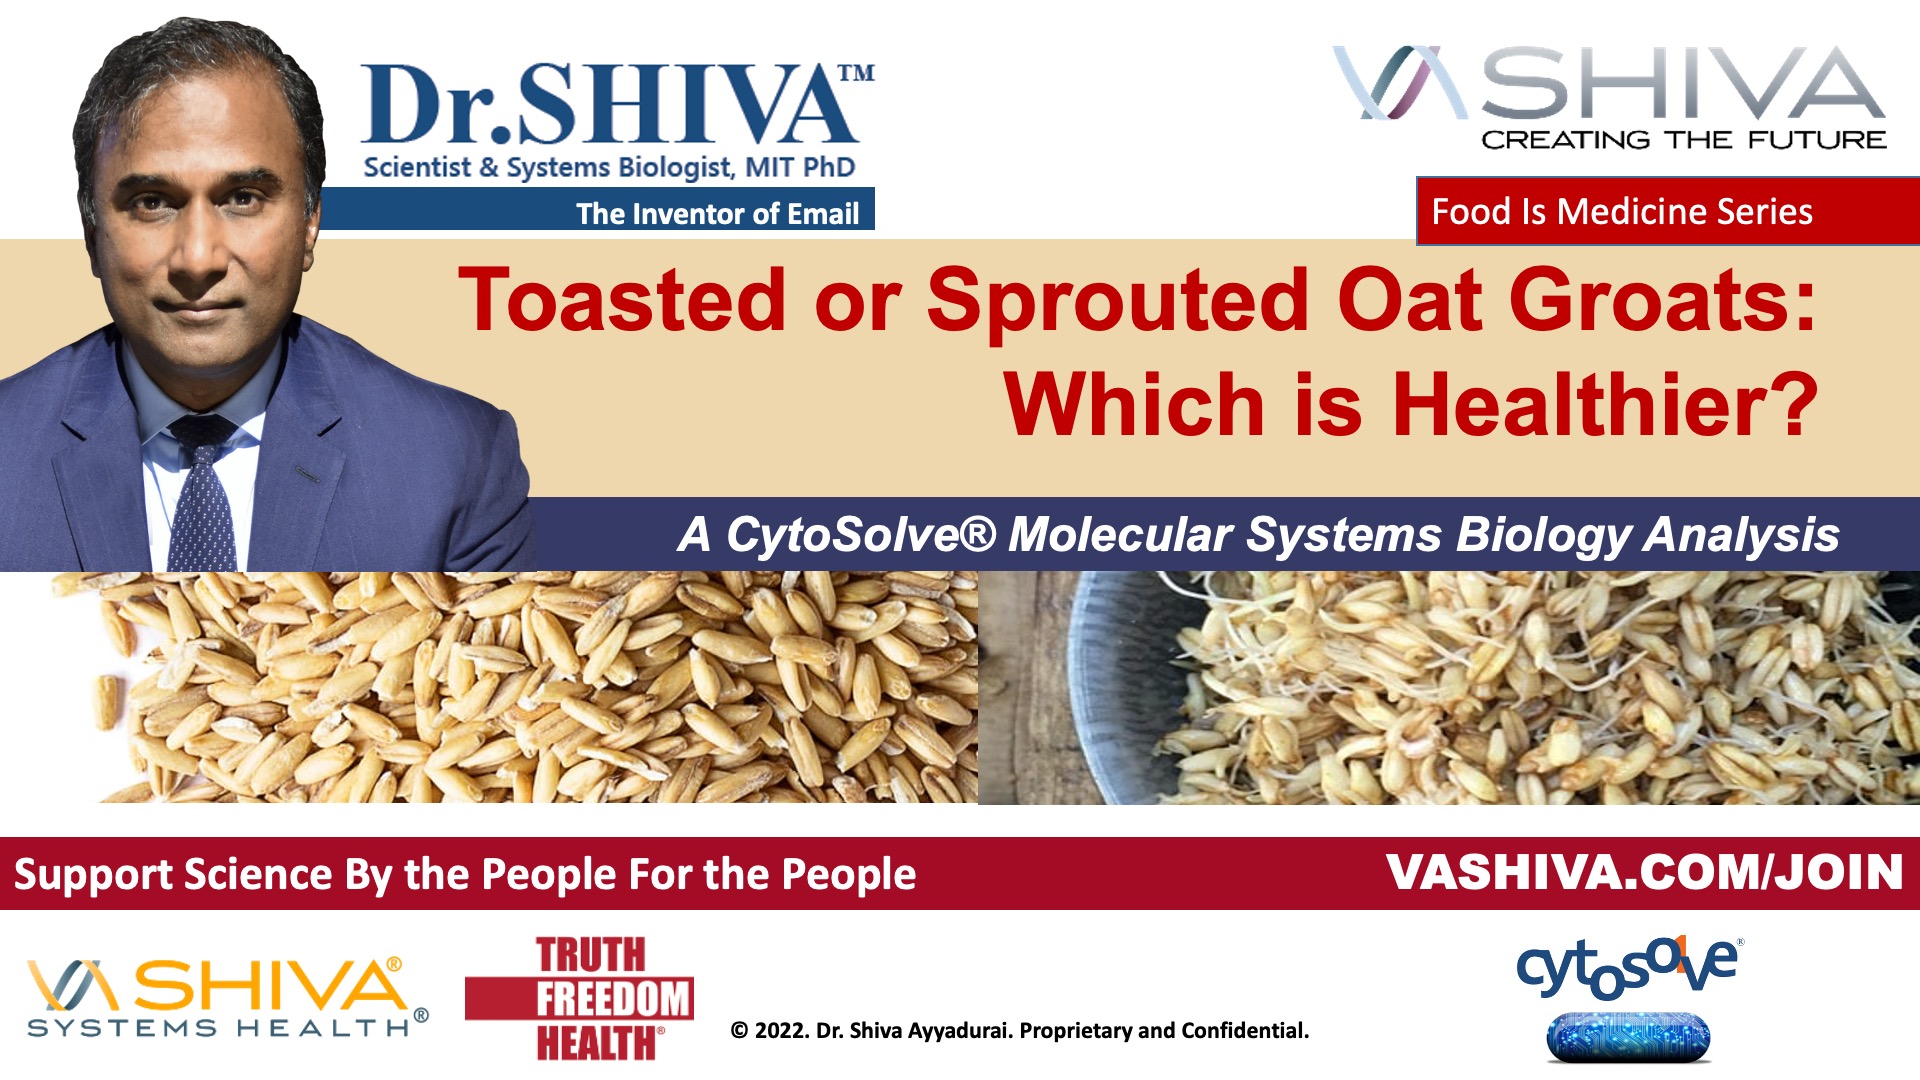 Dr.SHIVA LIVE: Toasted or Sprouted Oat Groats - Which is Healthier?